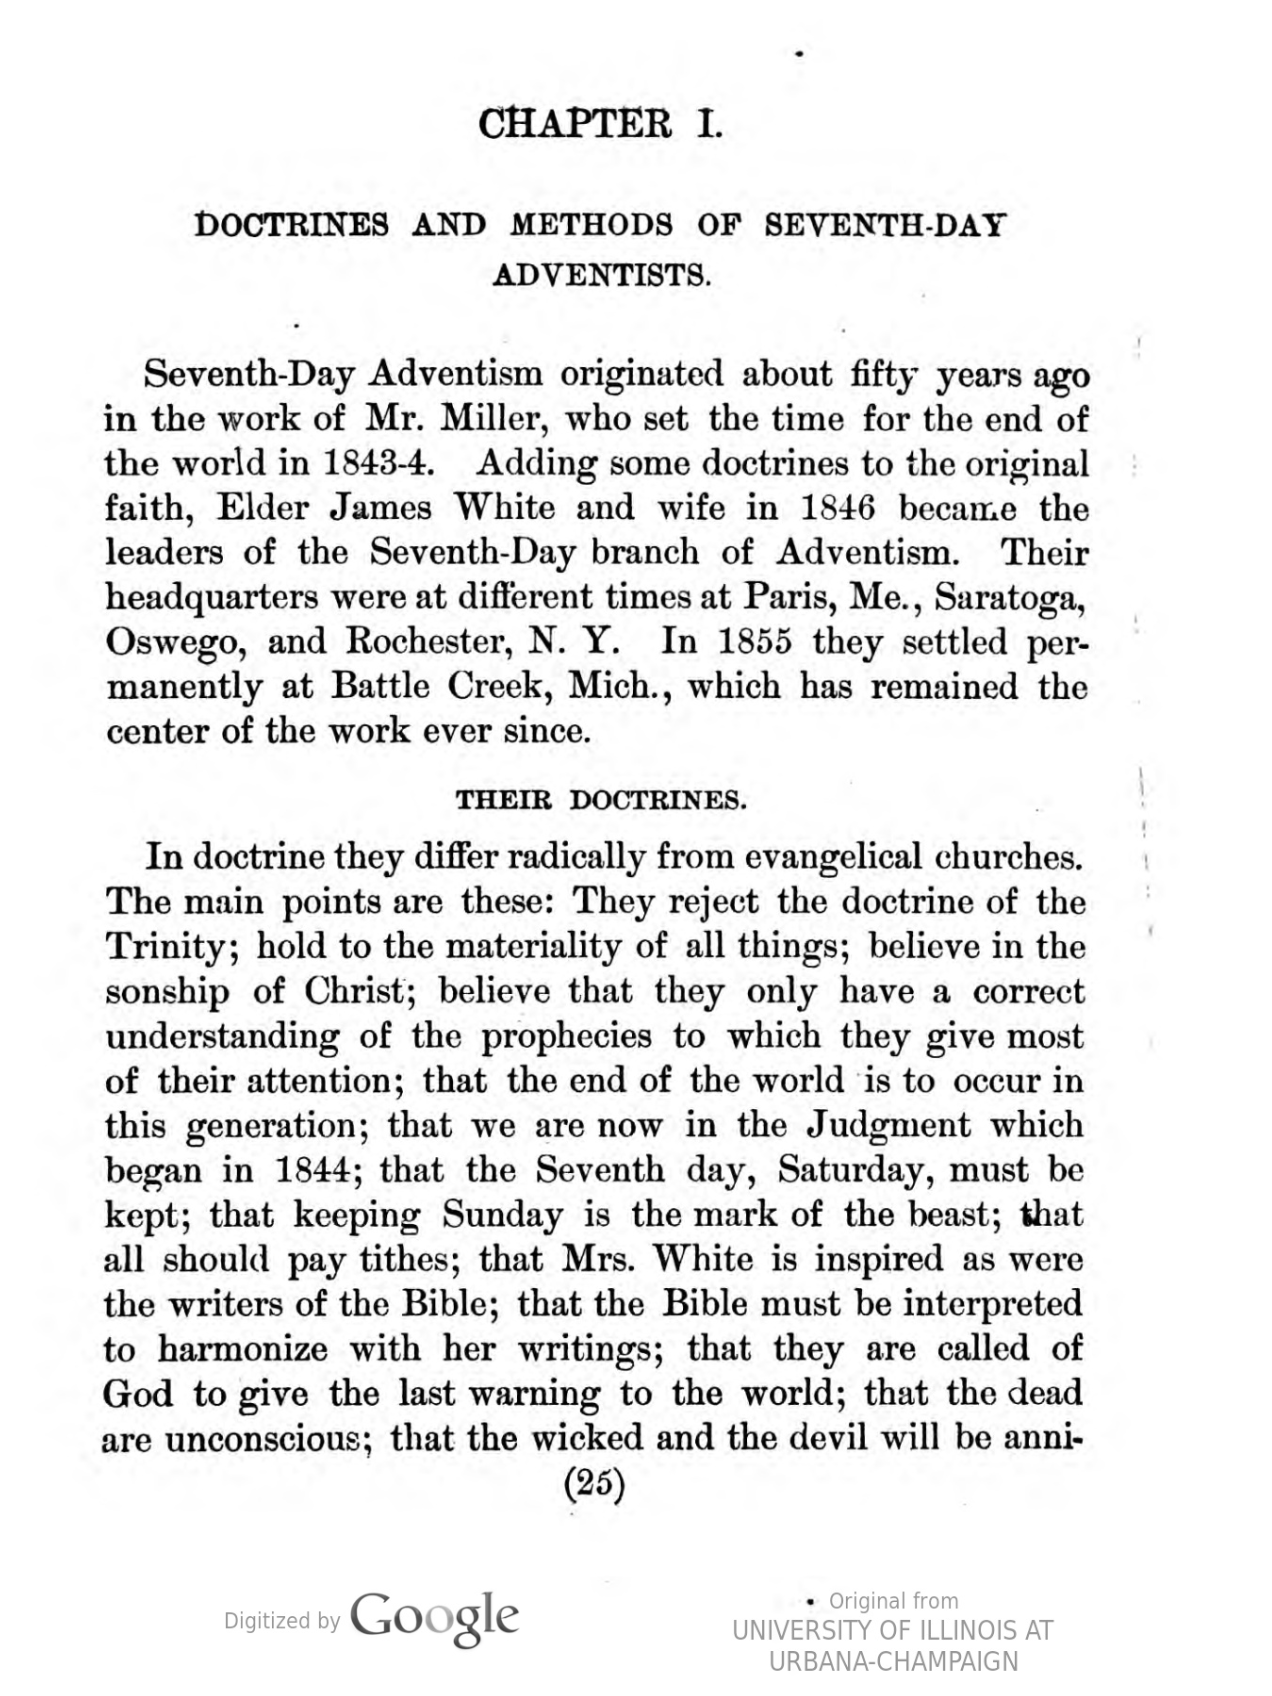 Seventh-day Adventism Renounced 1889, 6th Edition, pg 25;  Source: https://babel.hathitrust.org/cgi/ptid=uiug.30112069956131&amp;view=1up&amp;seq=31